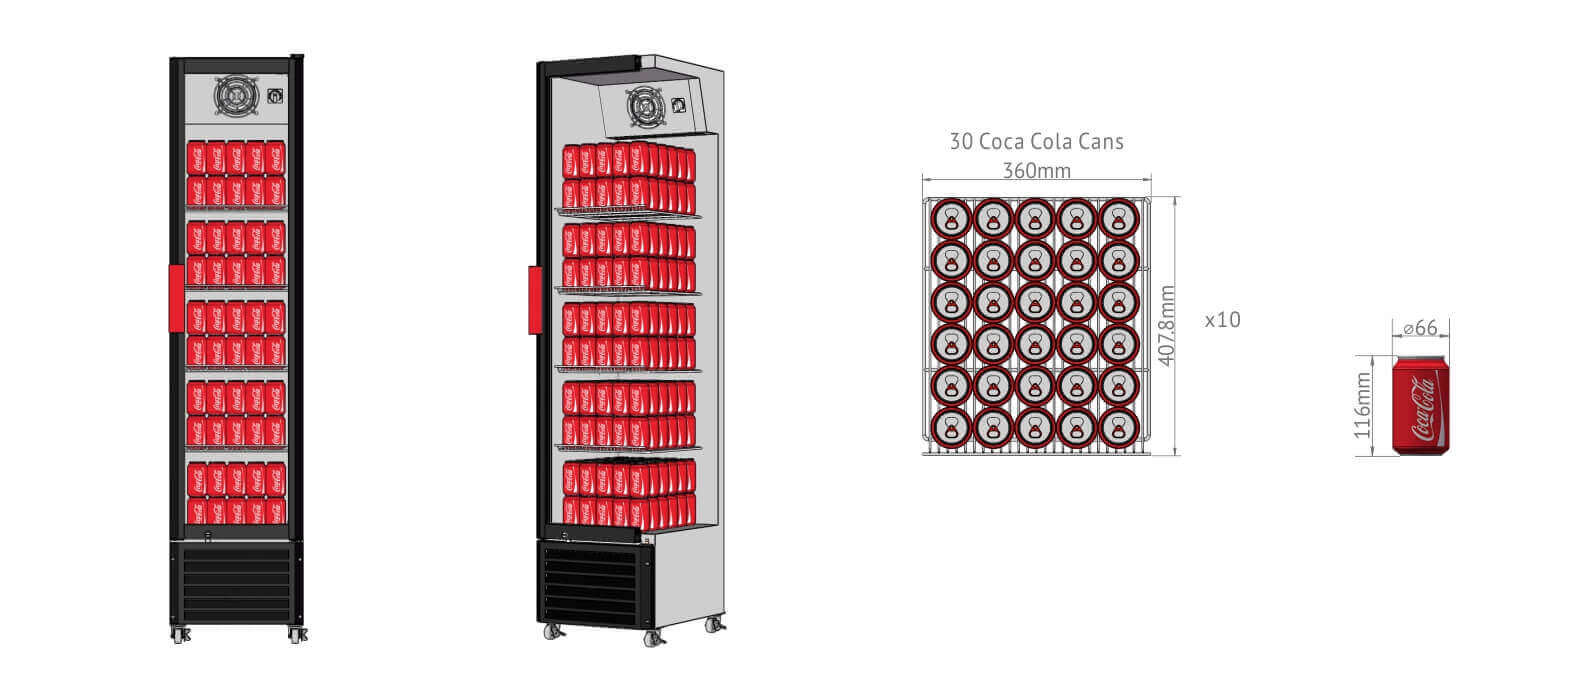 Procool Narrow Drinks Fridge CSL-260B Pack-out_Coca Cola 330ml Cans